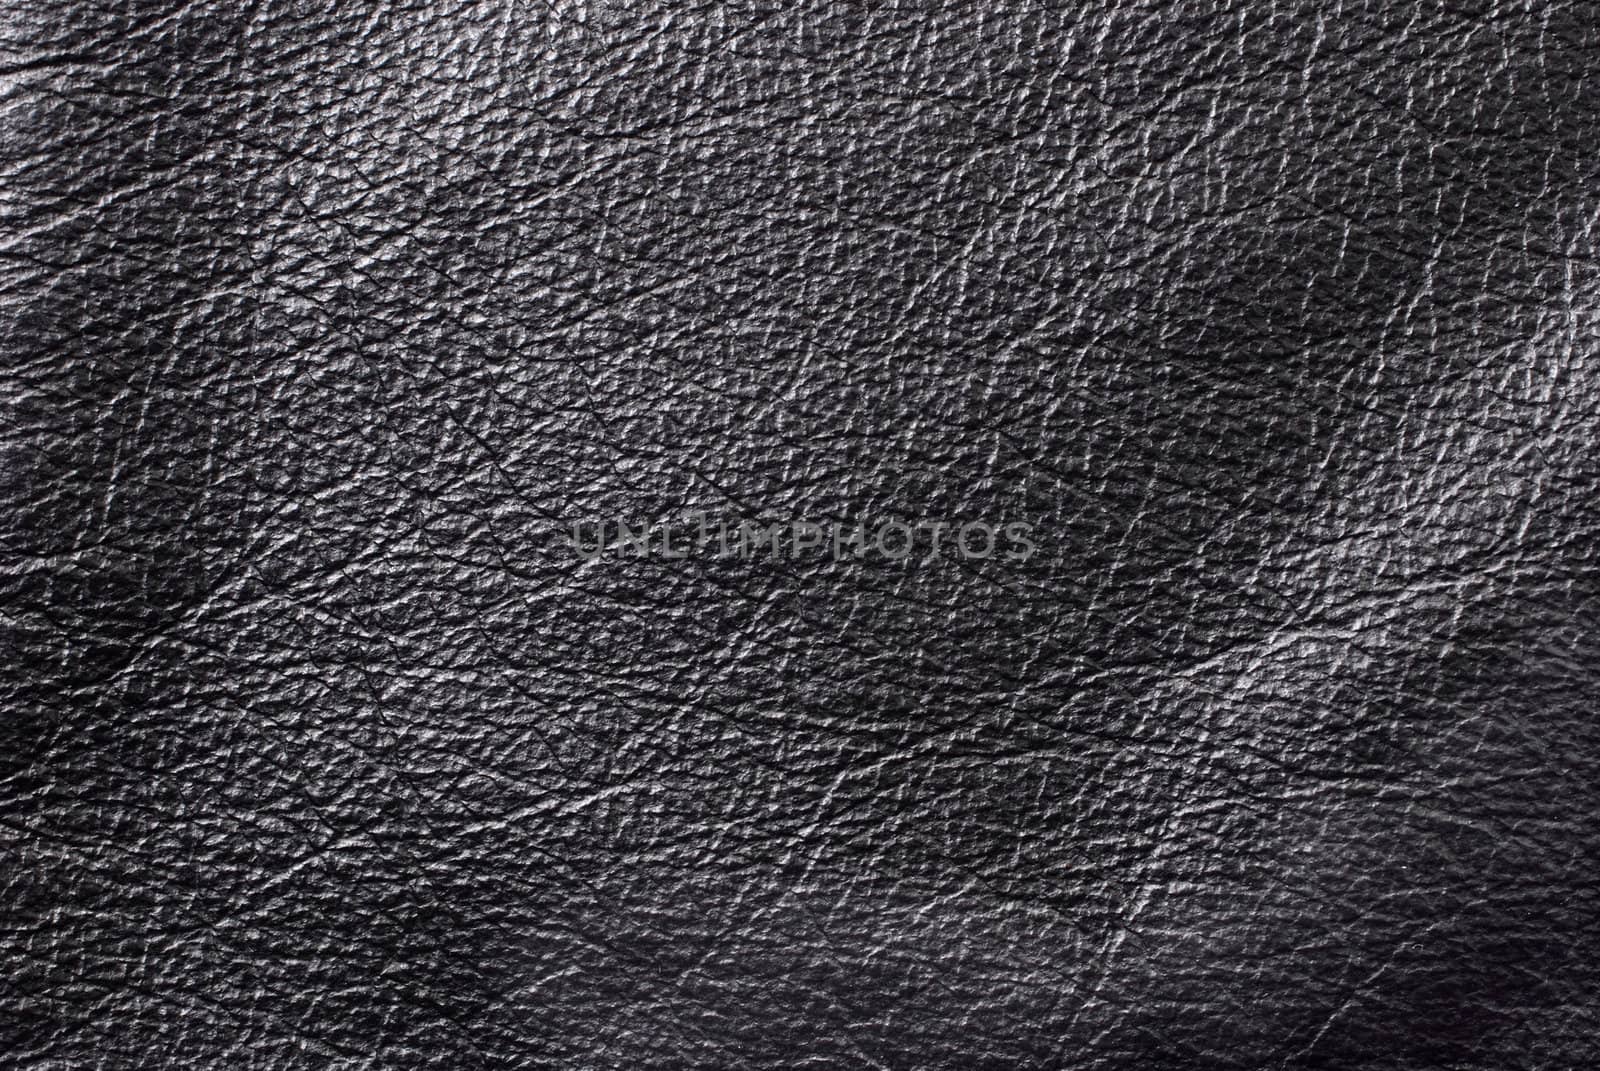 Macro of leather material for background use.